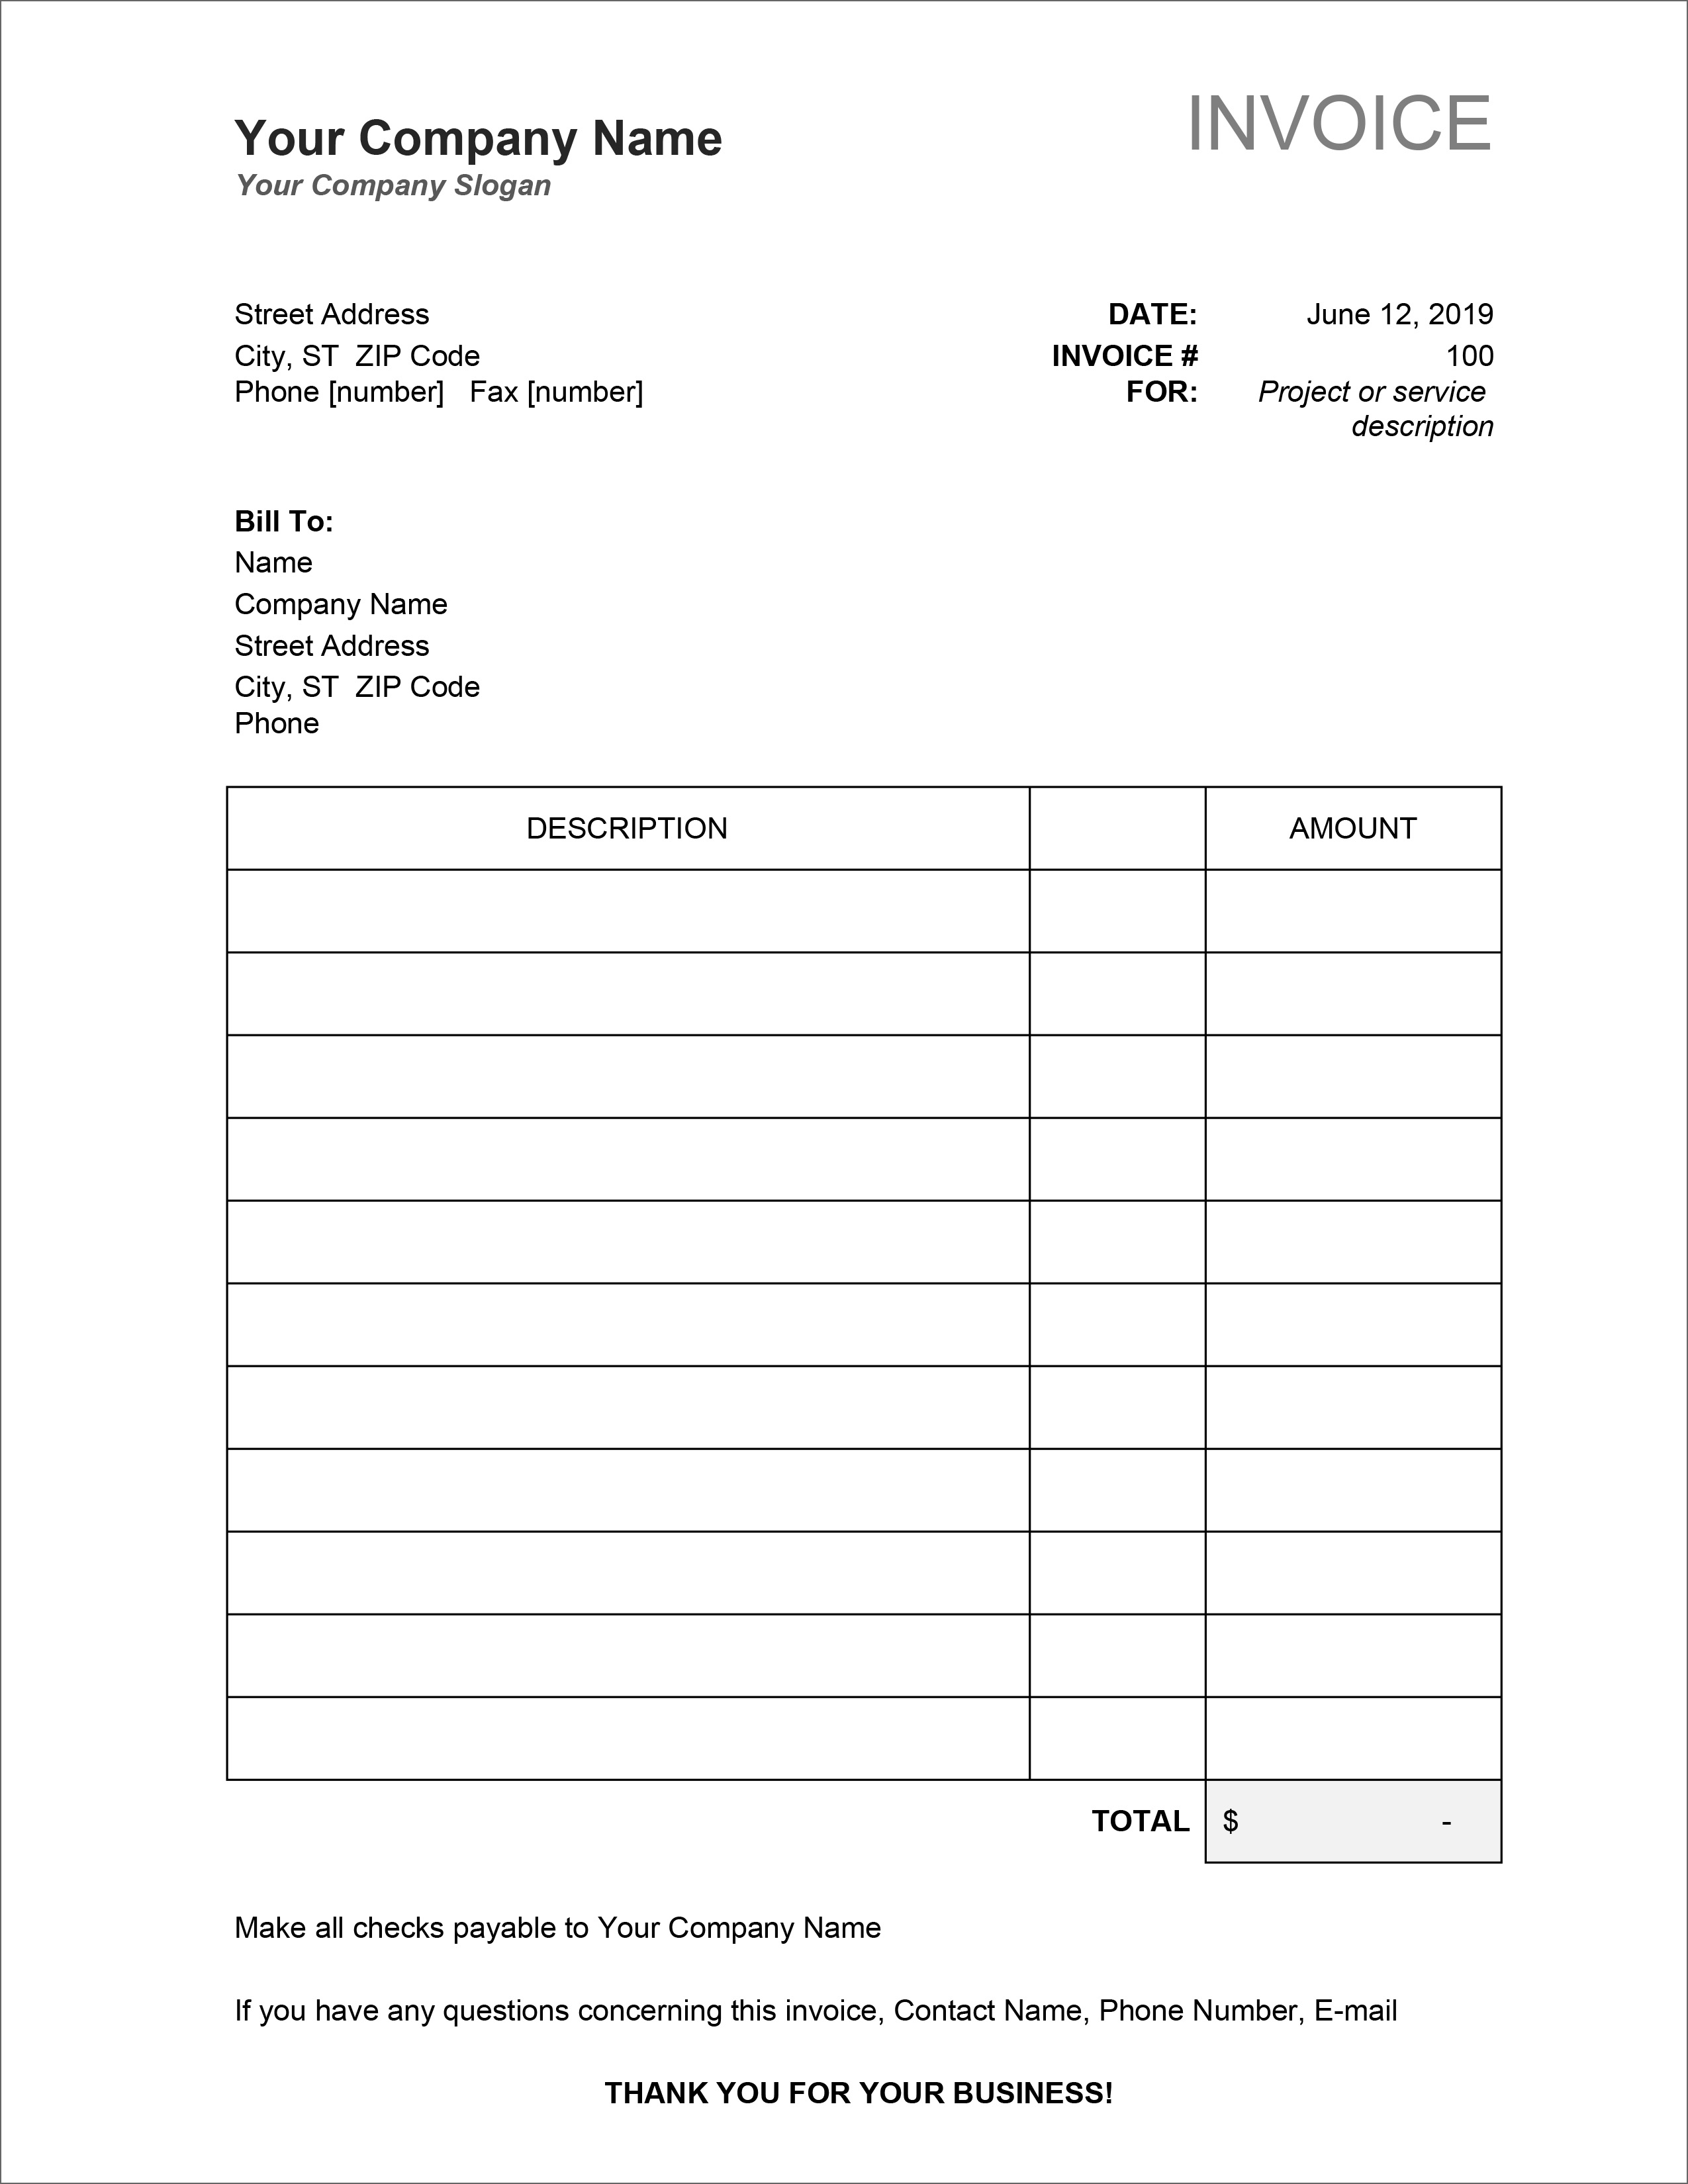 20 Free Invoice Templates In Microsoft Excel And DOCX Formats In Free Downloadable Invoice Template For Word